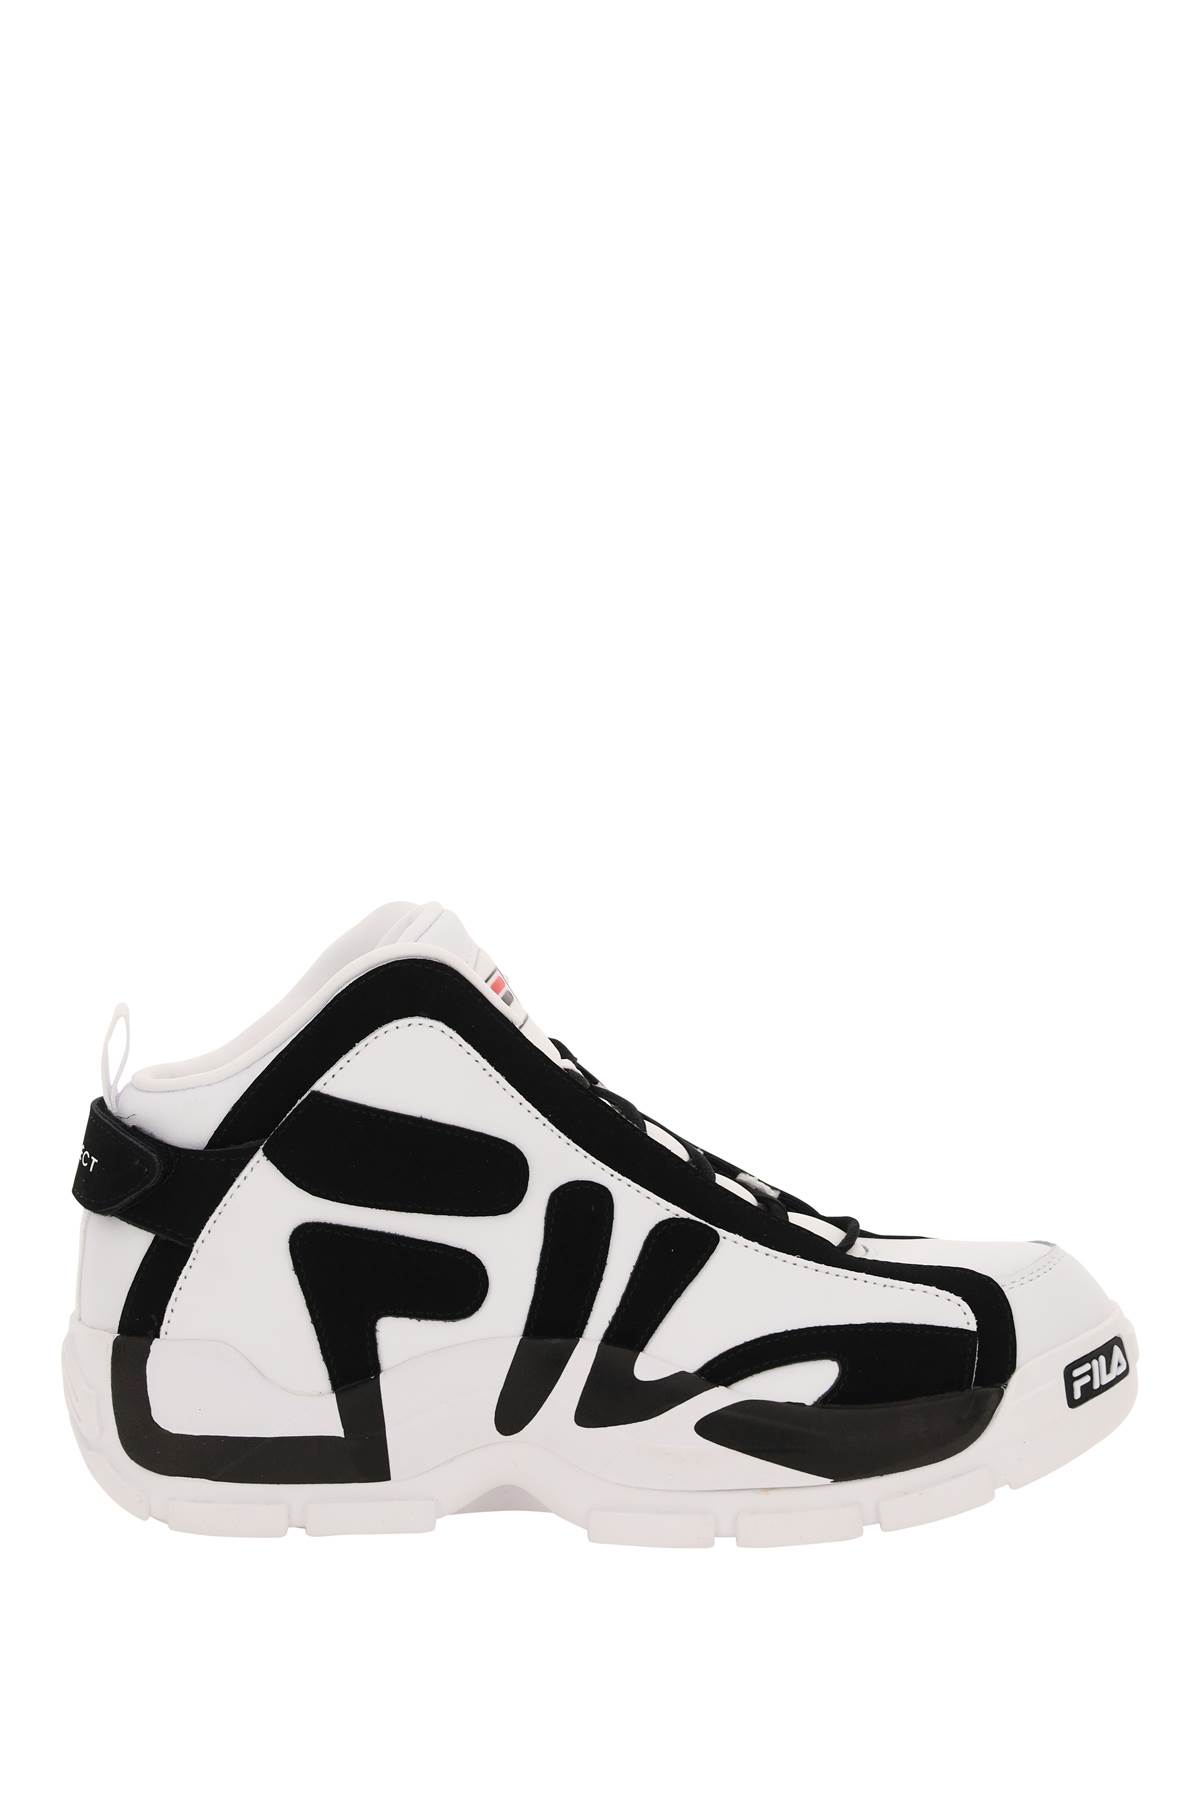 Y/Project Grant Hill Sneakers